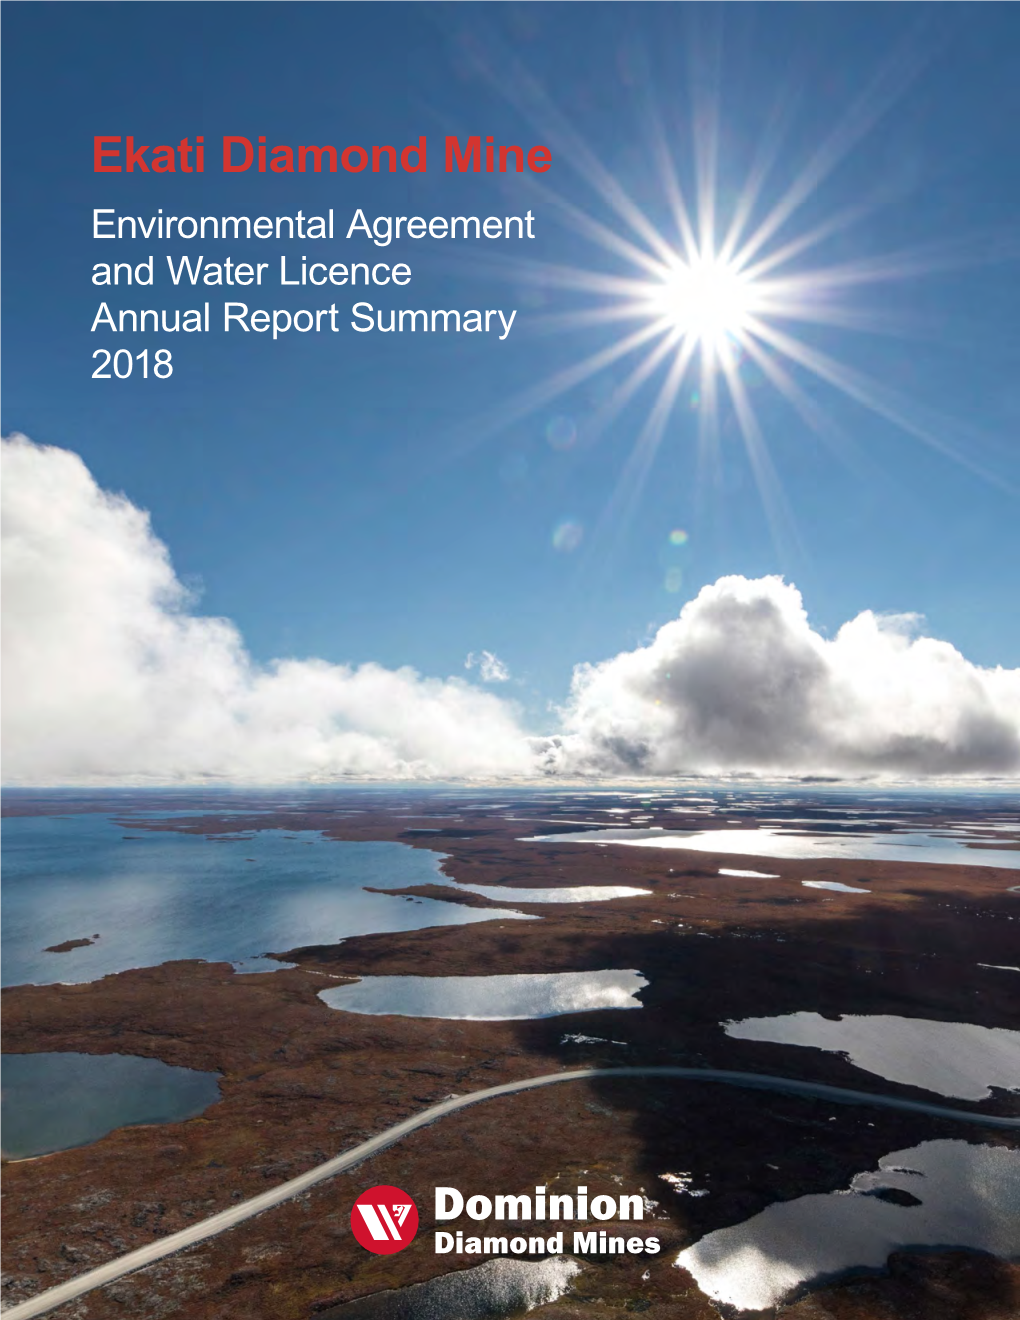 Ekati Diamond Mine Environmental Agreement and Water Licence Annual Report Summary 2018 May 24, 2019